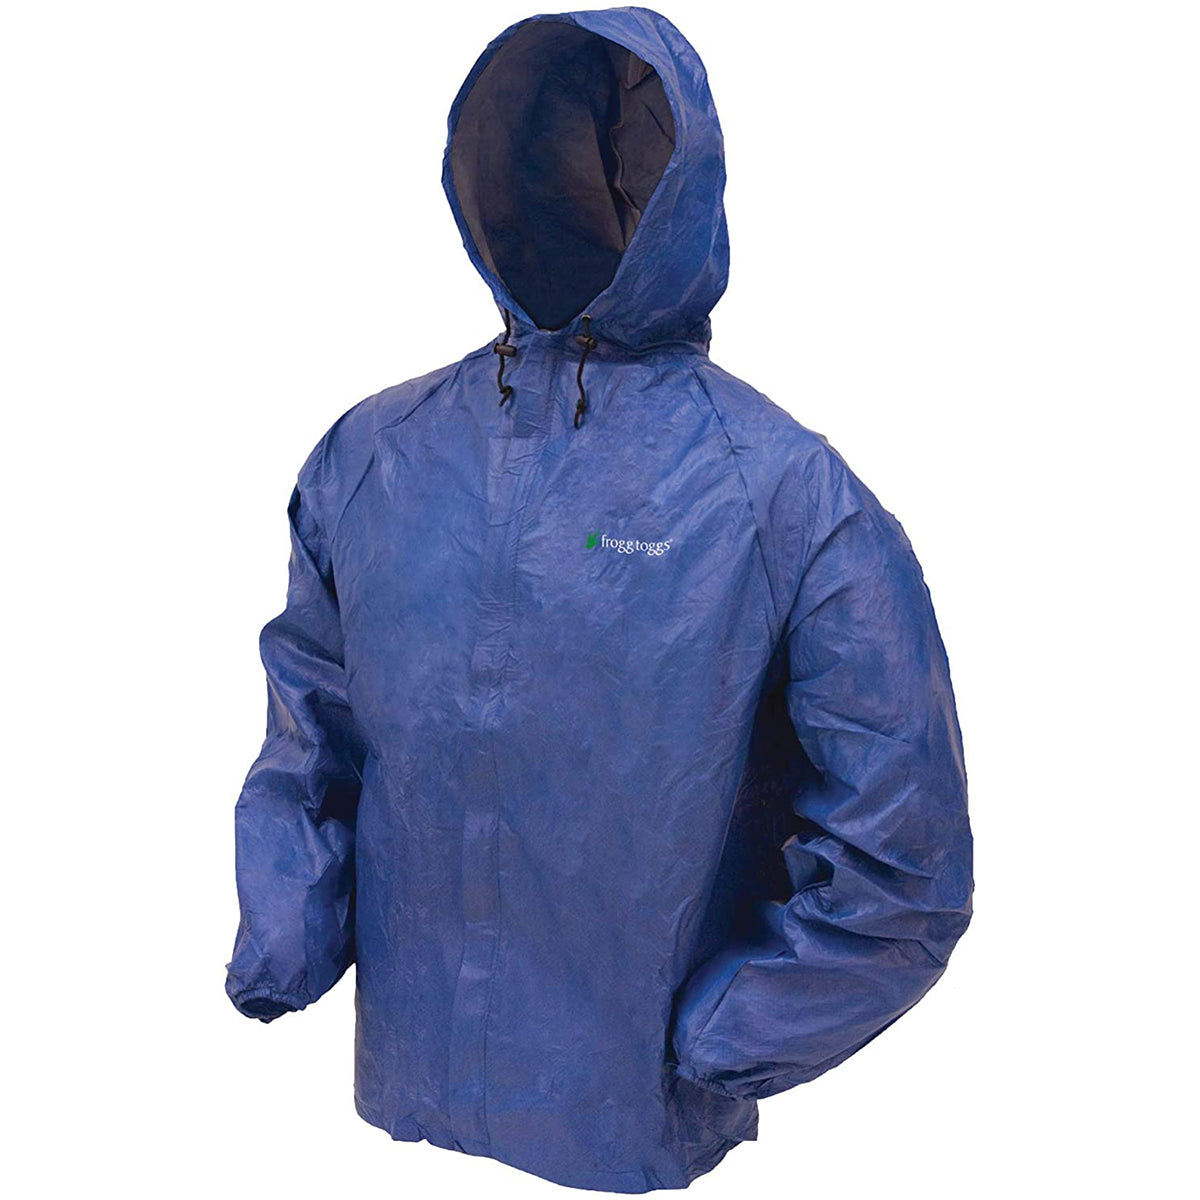 Frogg Toggs Ultra-Lite 2 Rain Suit - Blue Frogg Toggs